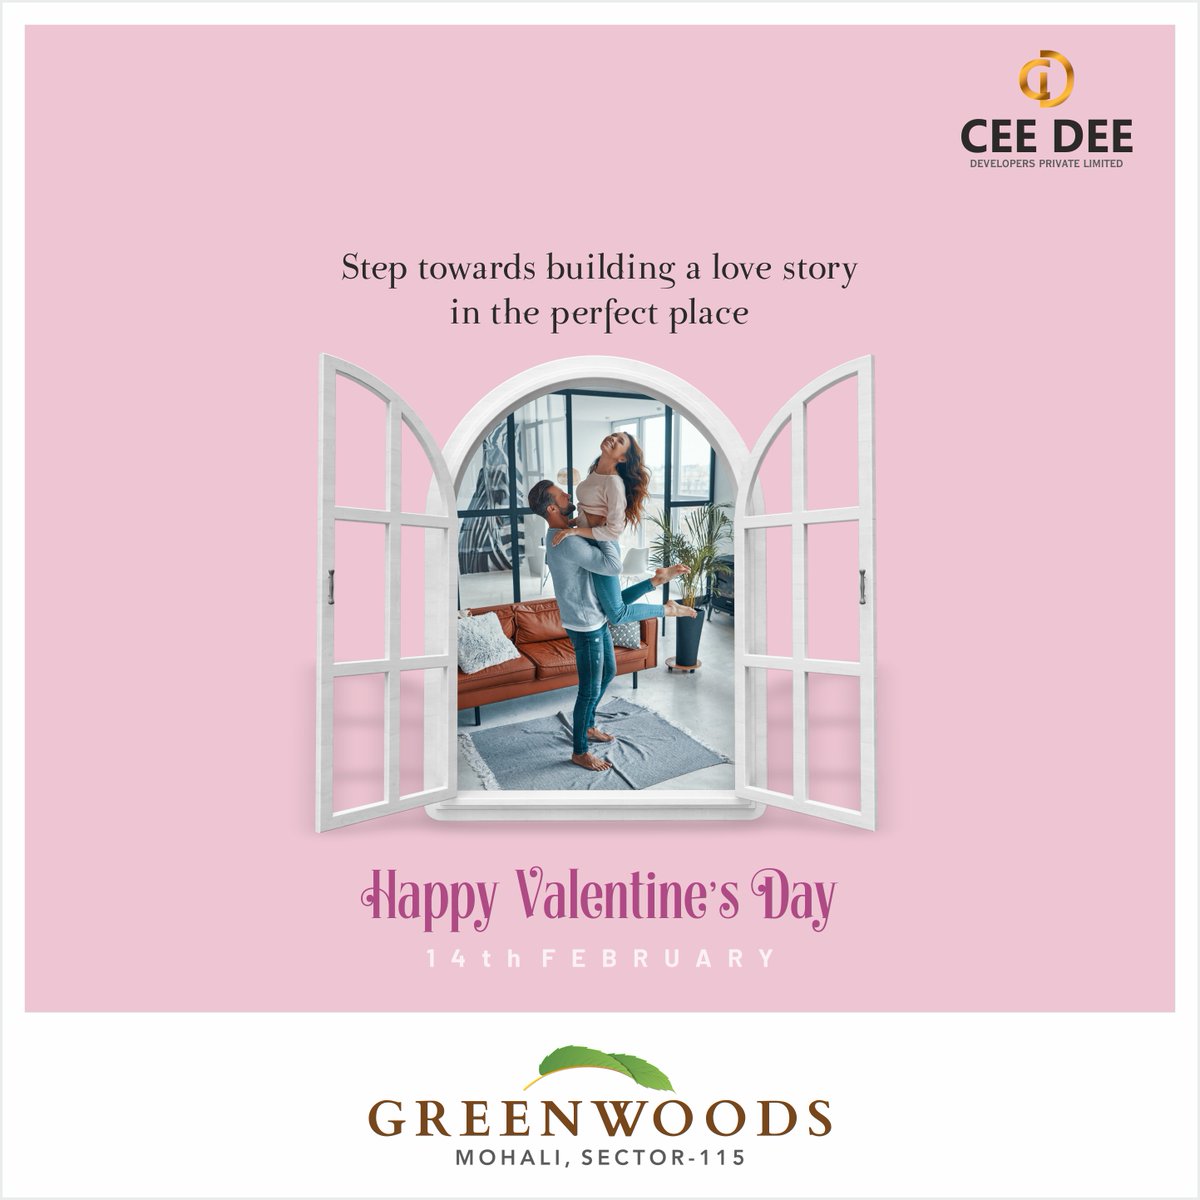 Happy Valentine's Day from Greenwoods.

#greenwoods #realestate #comingsoon #happyvalentineday #valentineday #monthoflove #plots #dreamhome #tricity #property #mohali #affordableprice #plot #plotsforsale #independent #propertyforsale #affordablehomes #affordableplots